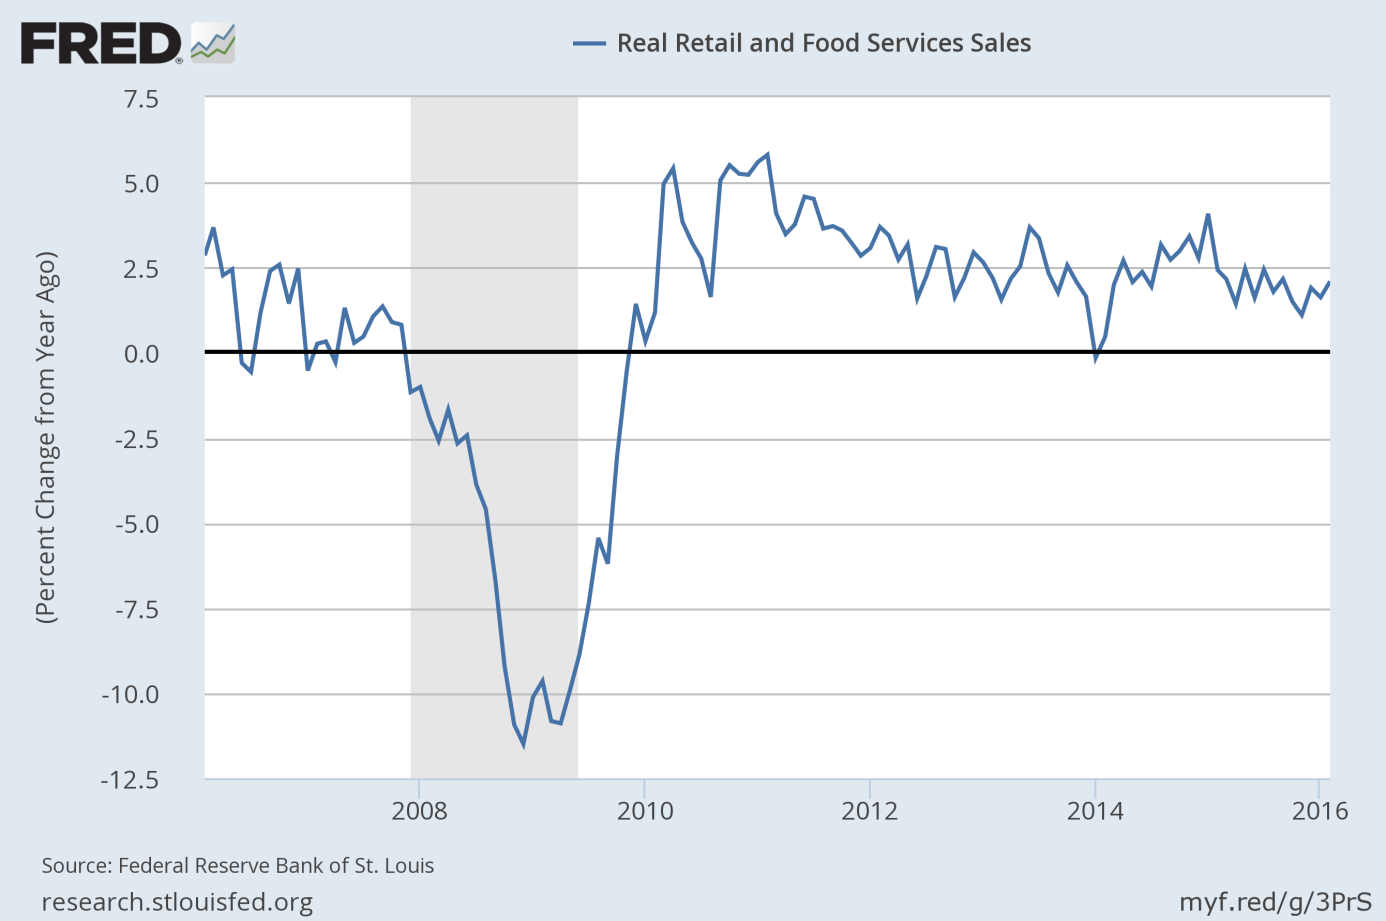 Retail sales (as percent change from year ago) from 2006 to 2016.